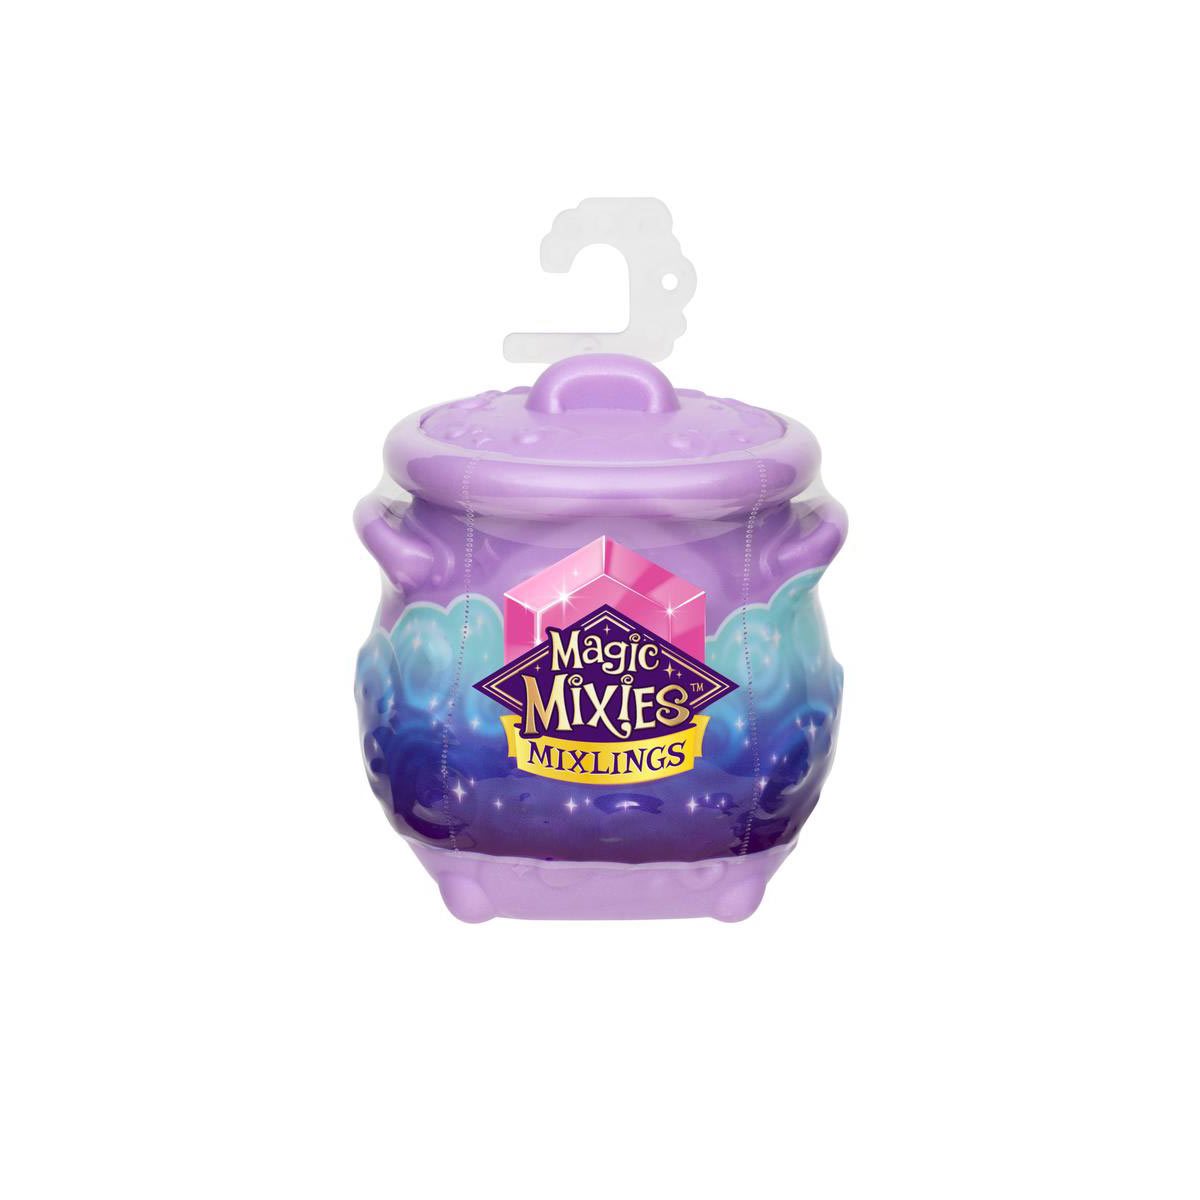 New! Magic Mixies Mixlings Cauldrons Each One Has a Special